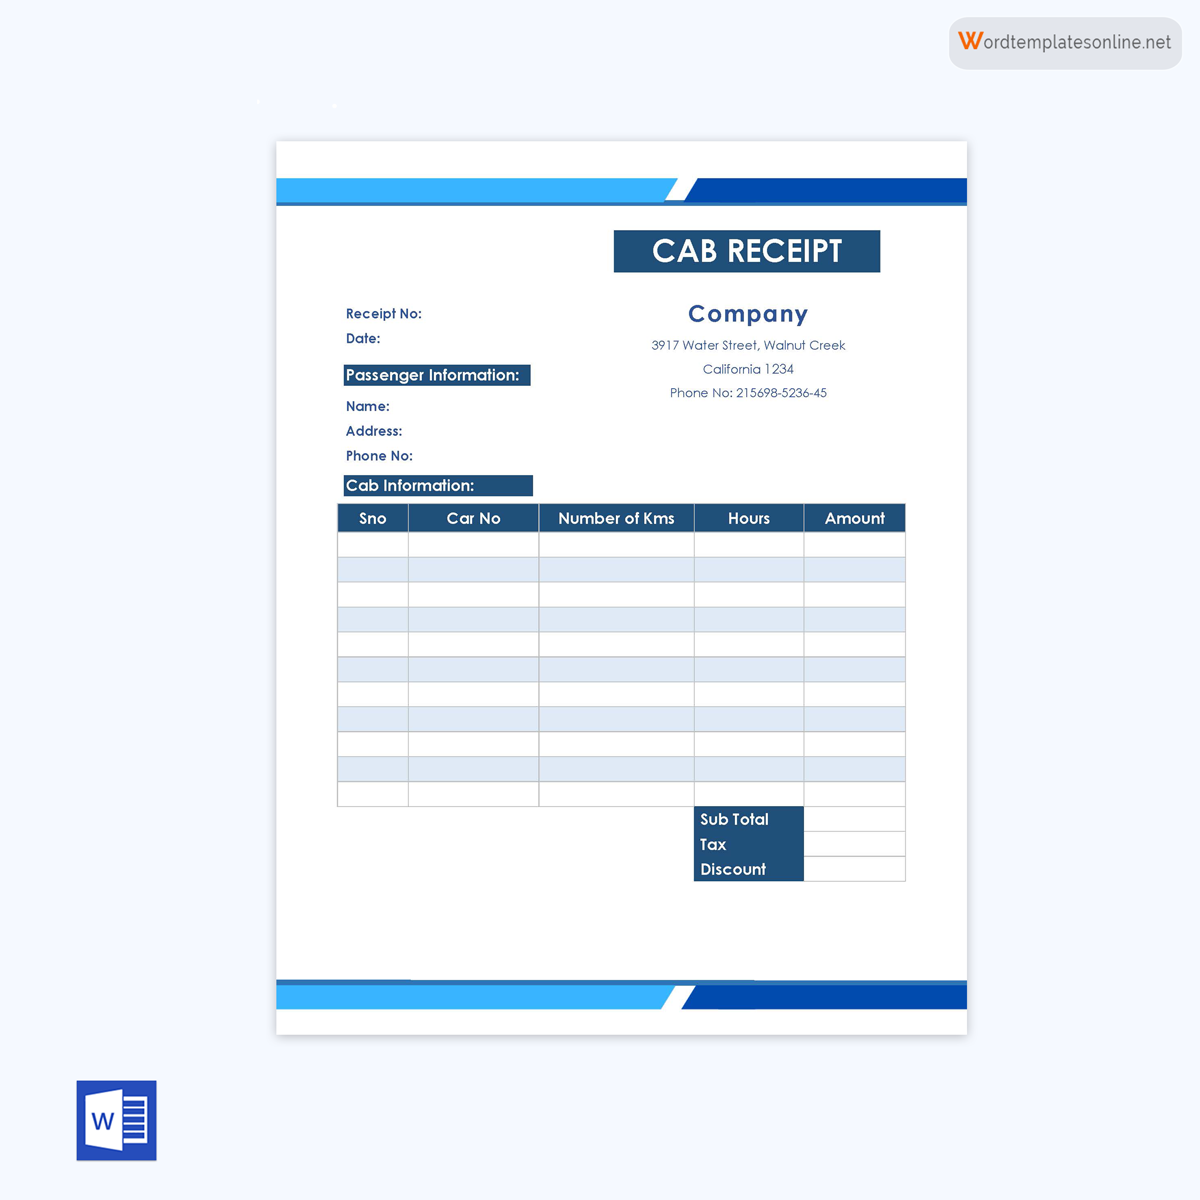 Free taxi receipt example - Download Now!